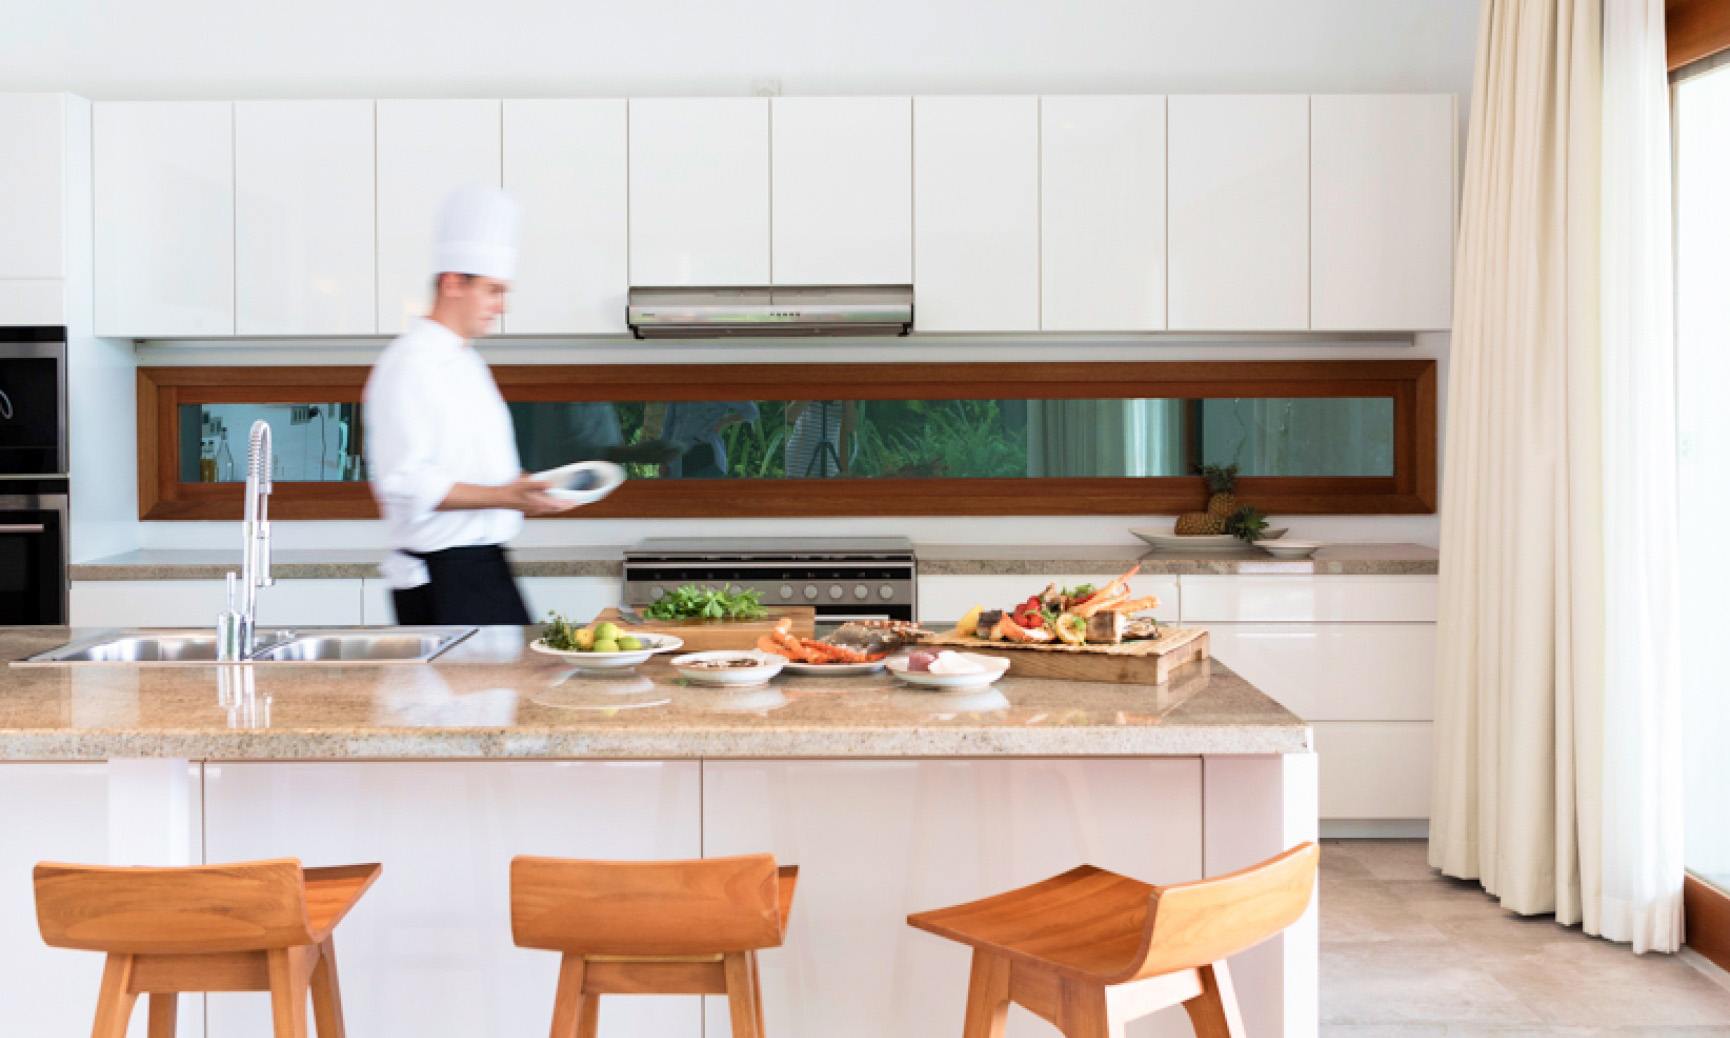 The private chef available on request preparing a meal in the expansive kitchen at our Beach Resort Residences.